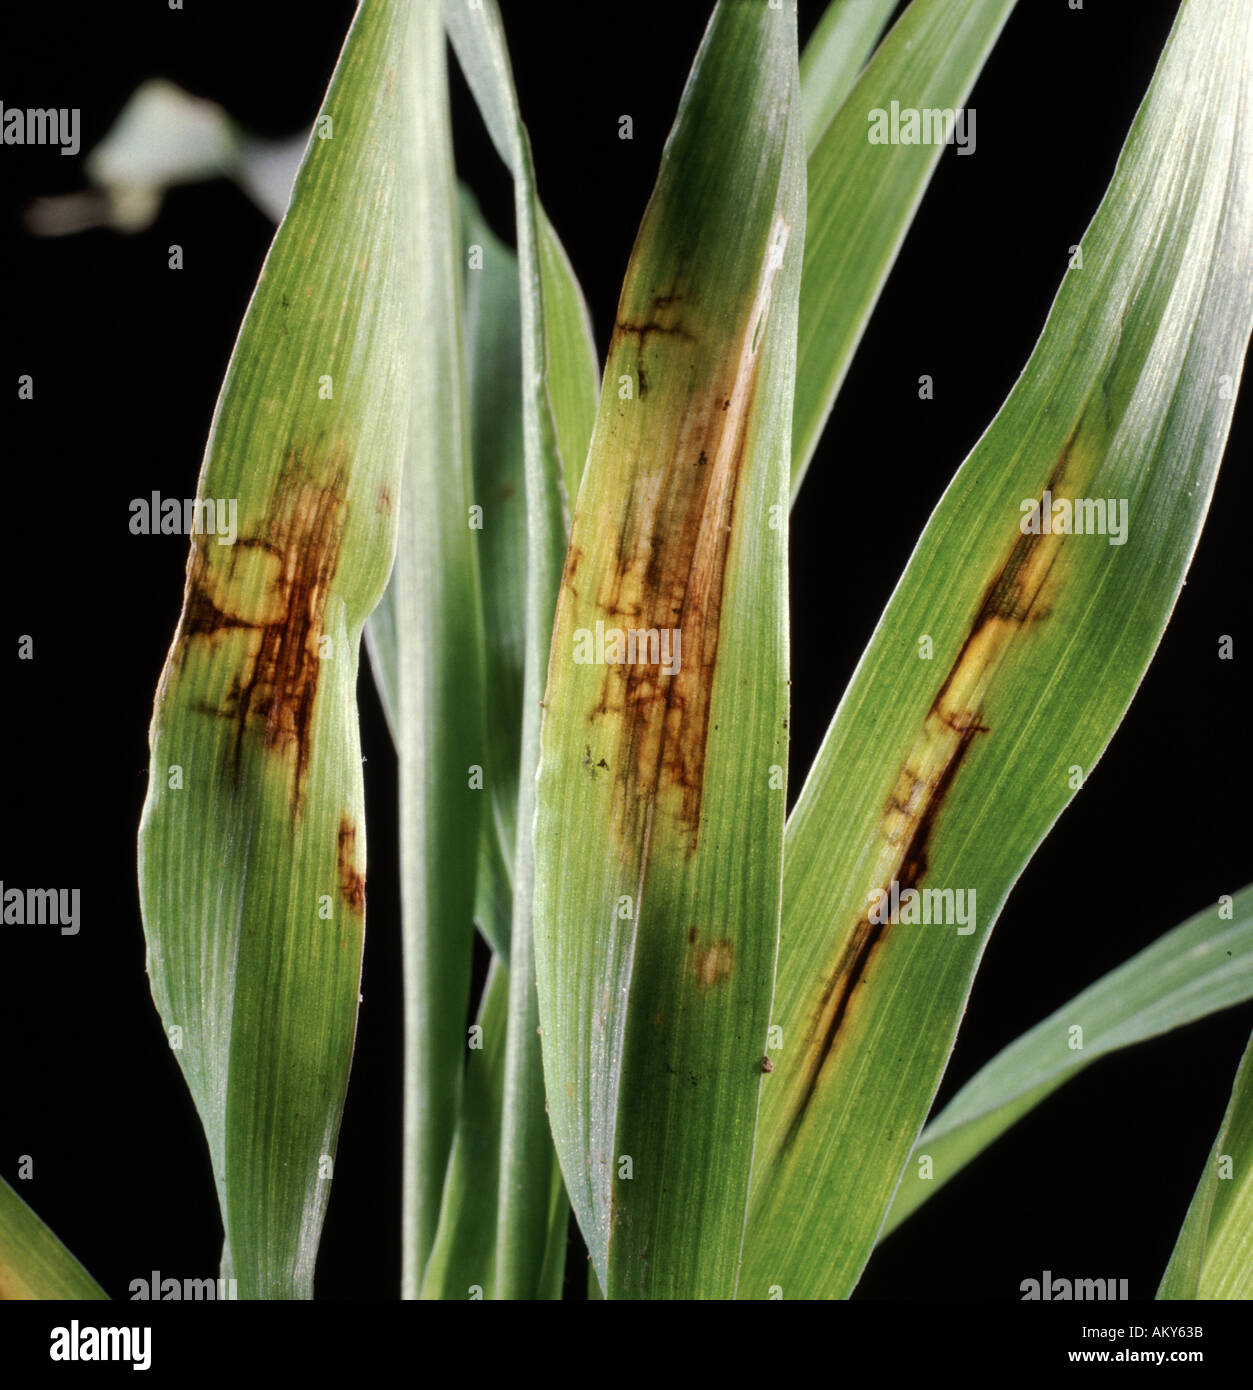 Net Blotch Pyrenophora Teres On Seedling Barley Plant An Important